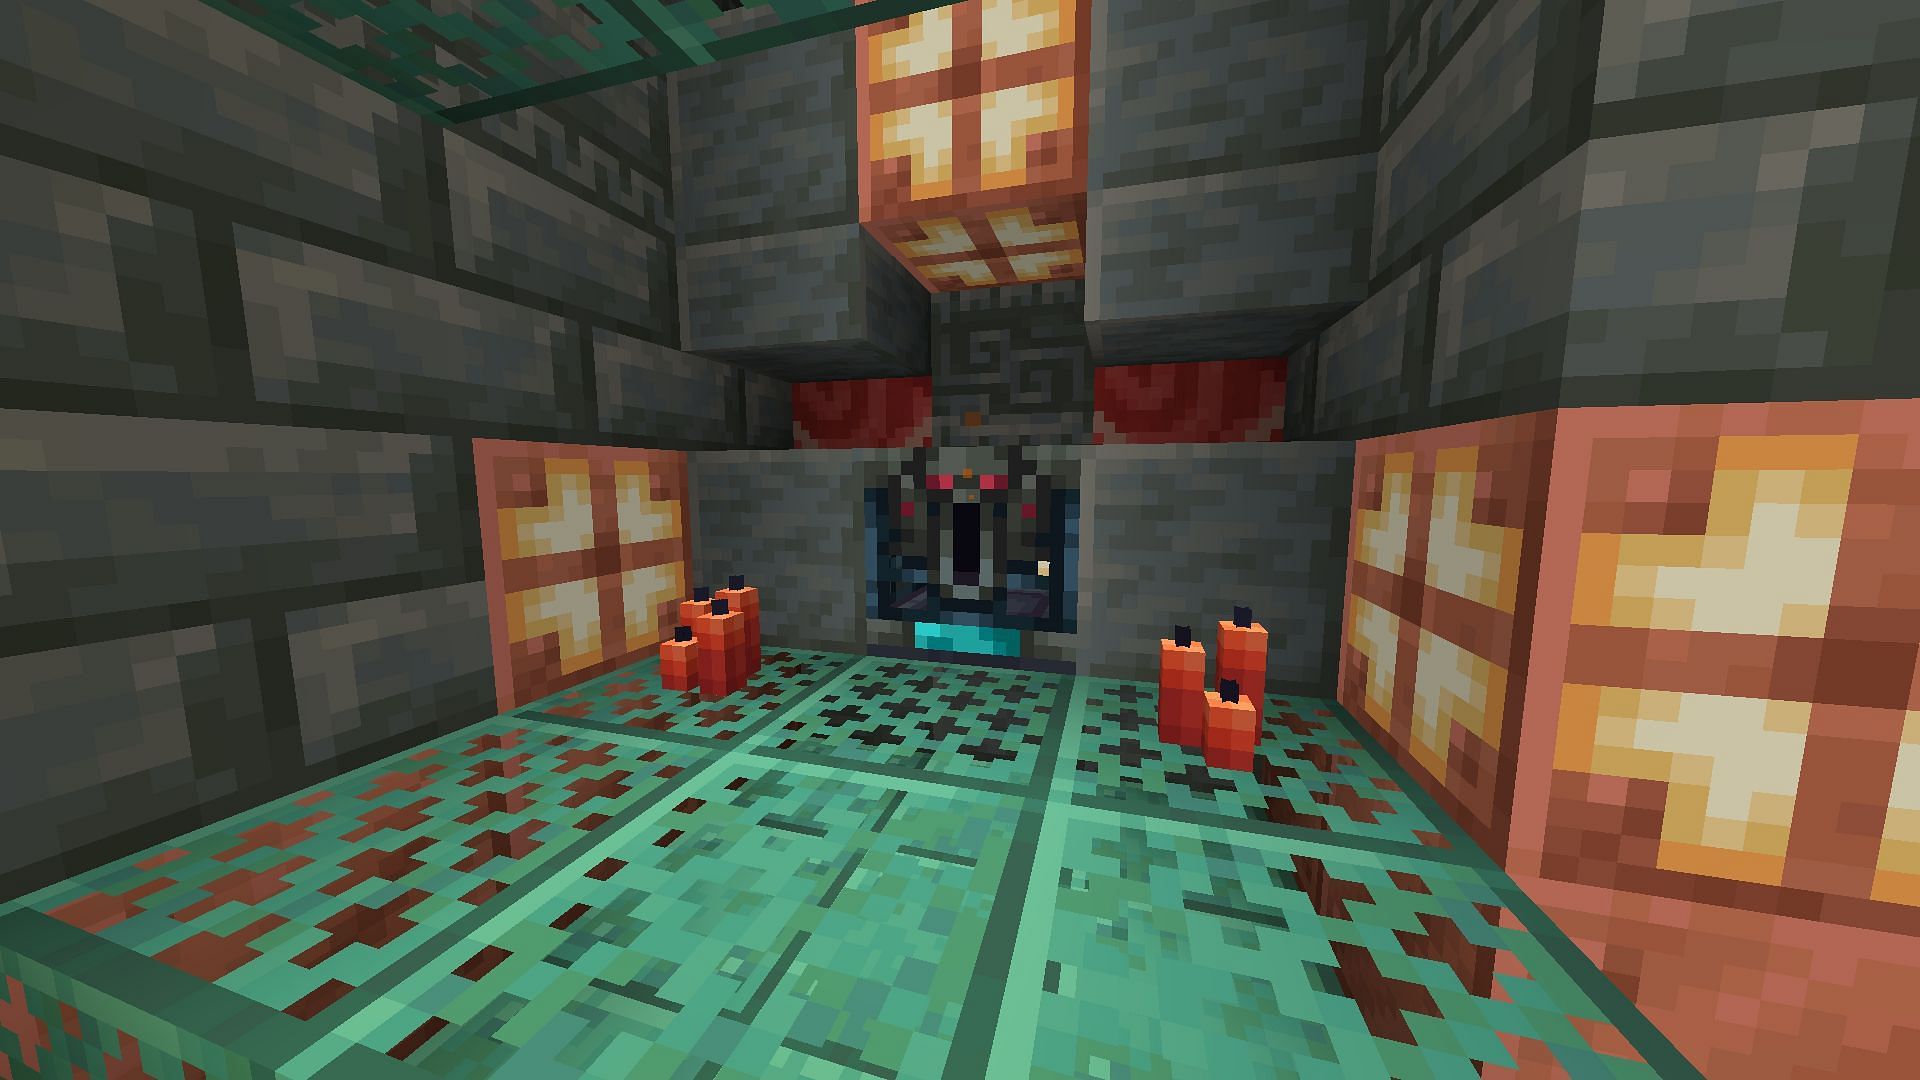 The wind burst enchantment can only be found in ominous vaults in Minecraft (Image via Mojang Studios)